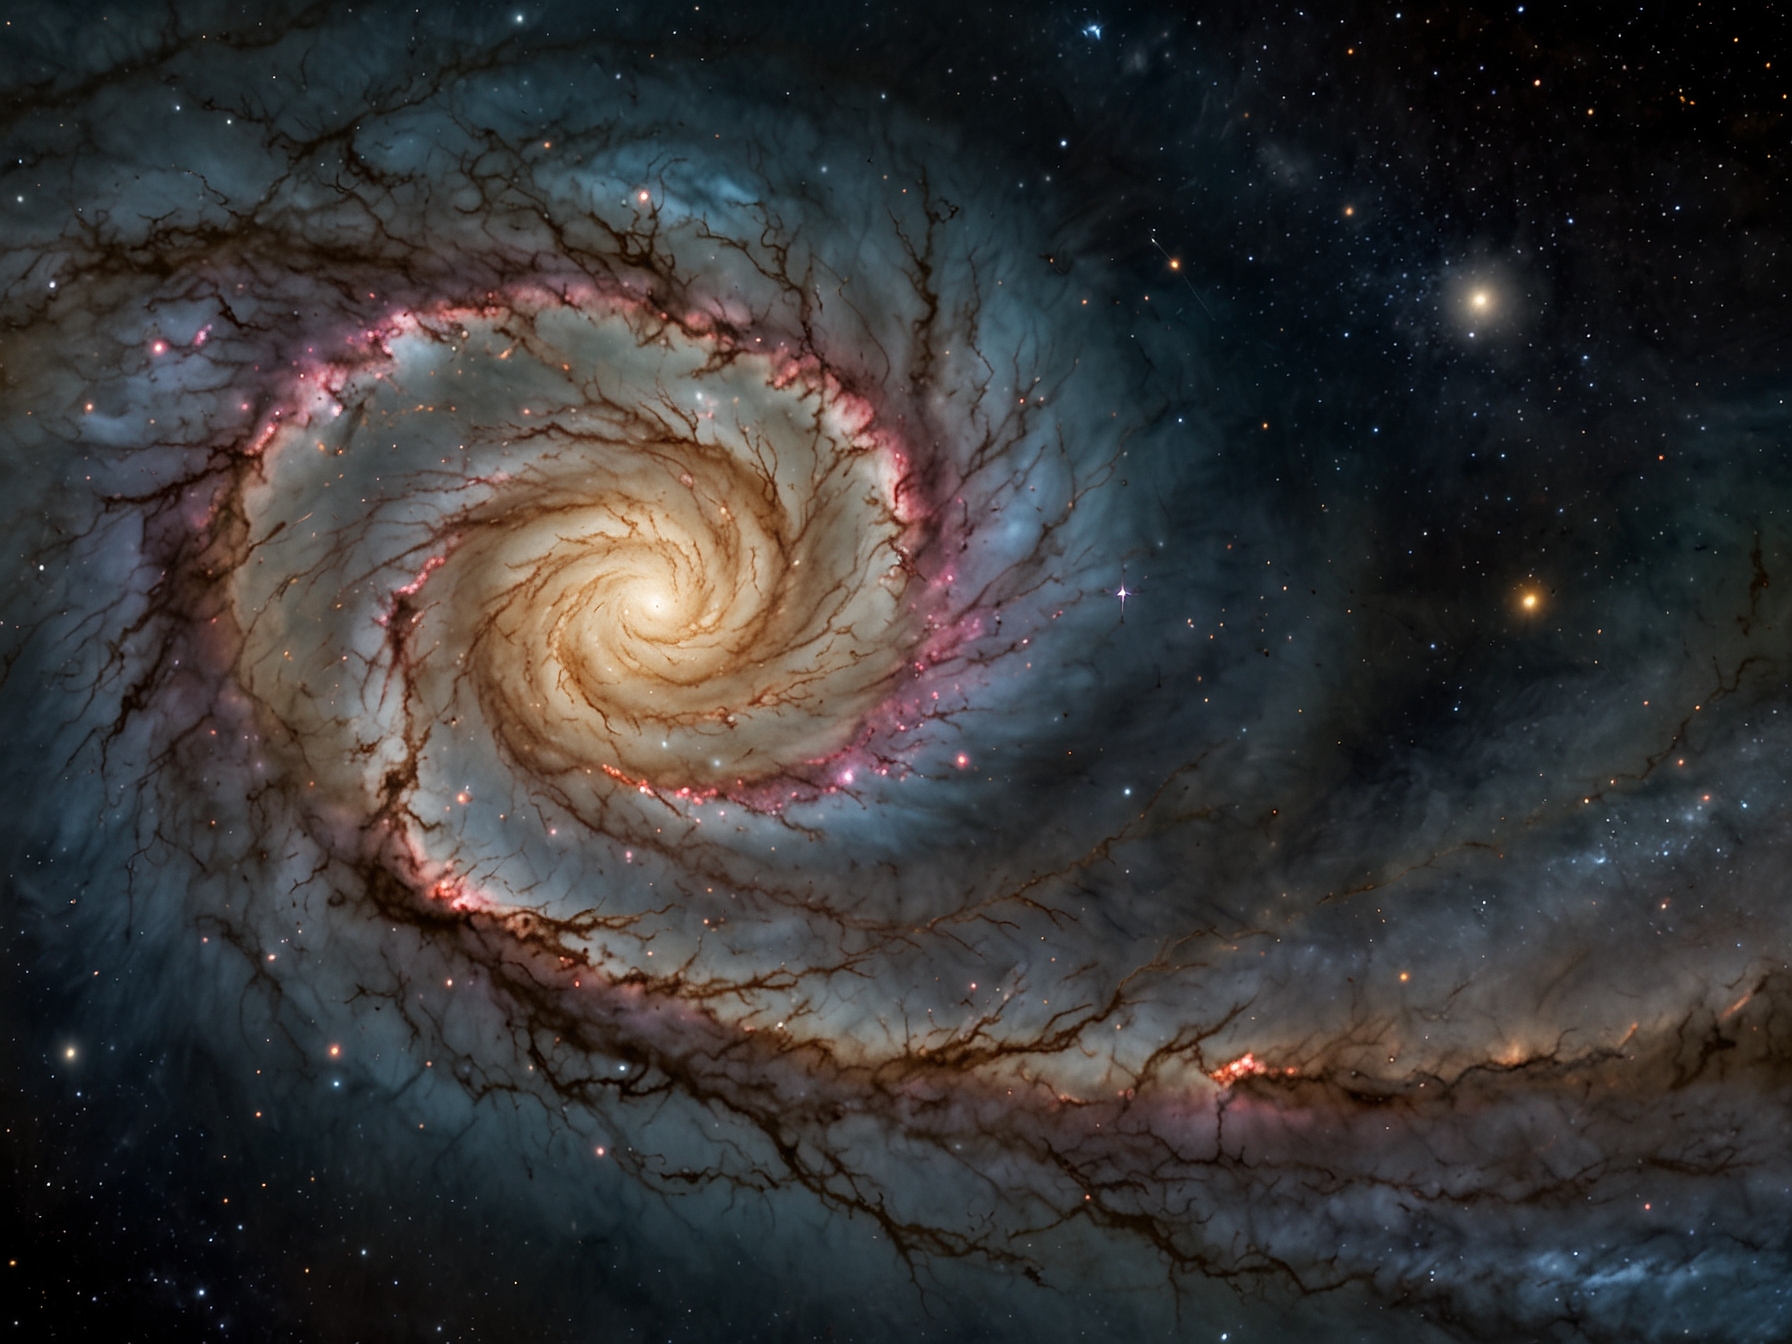 The Whirlpool Galaxy, M51, showcases its distinctive spiral arms and vibrant colors, presenting an enchanting view of this classic spiral galaxy located around 23 million light-years away.